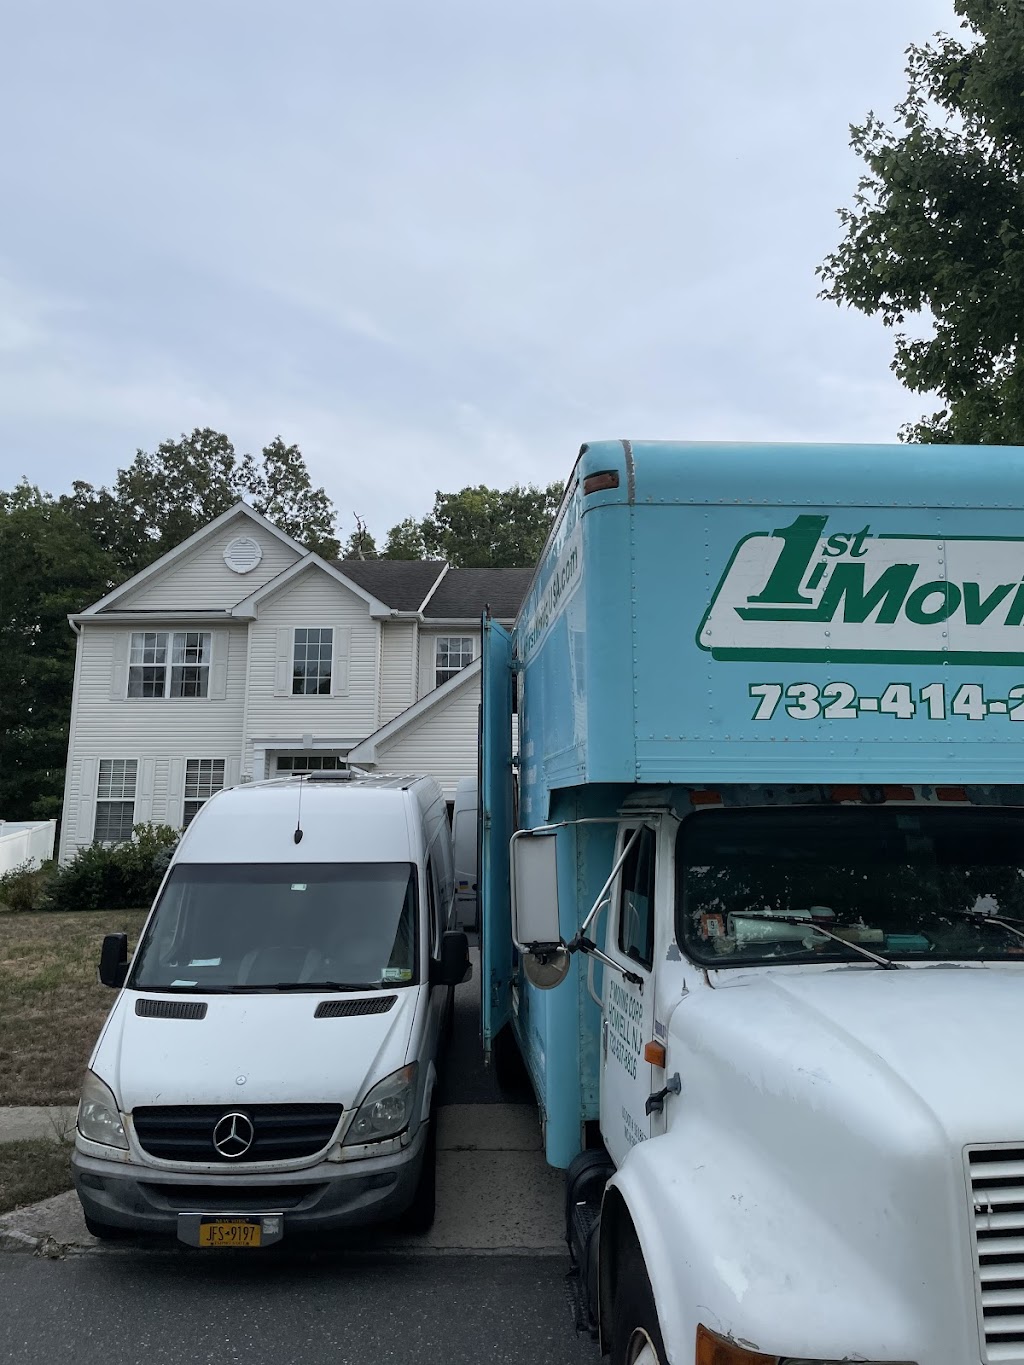 1st Moving Corp. | 1743 US 9 North, Howell Township, NJ 07731 | Phone: (732) 414-2727